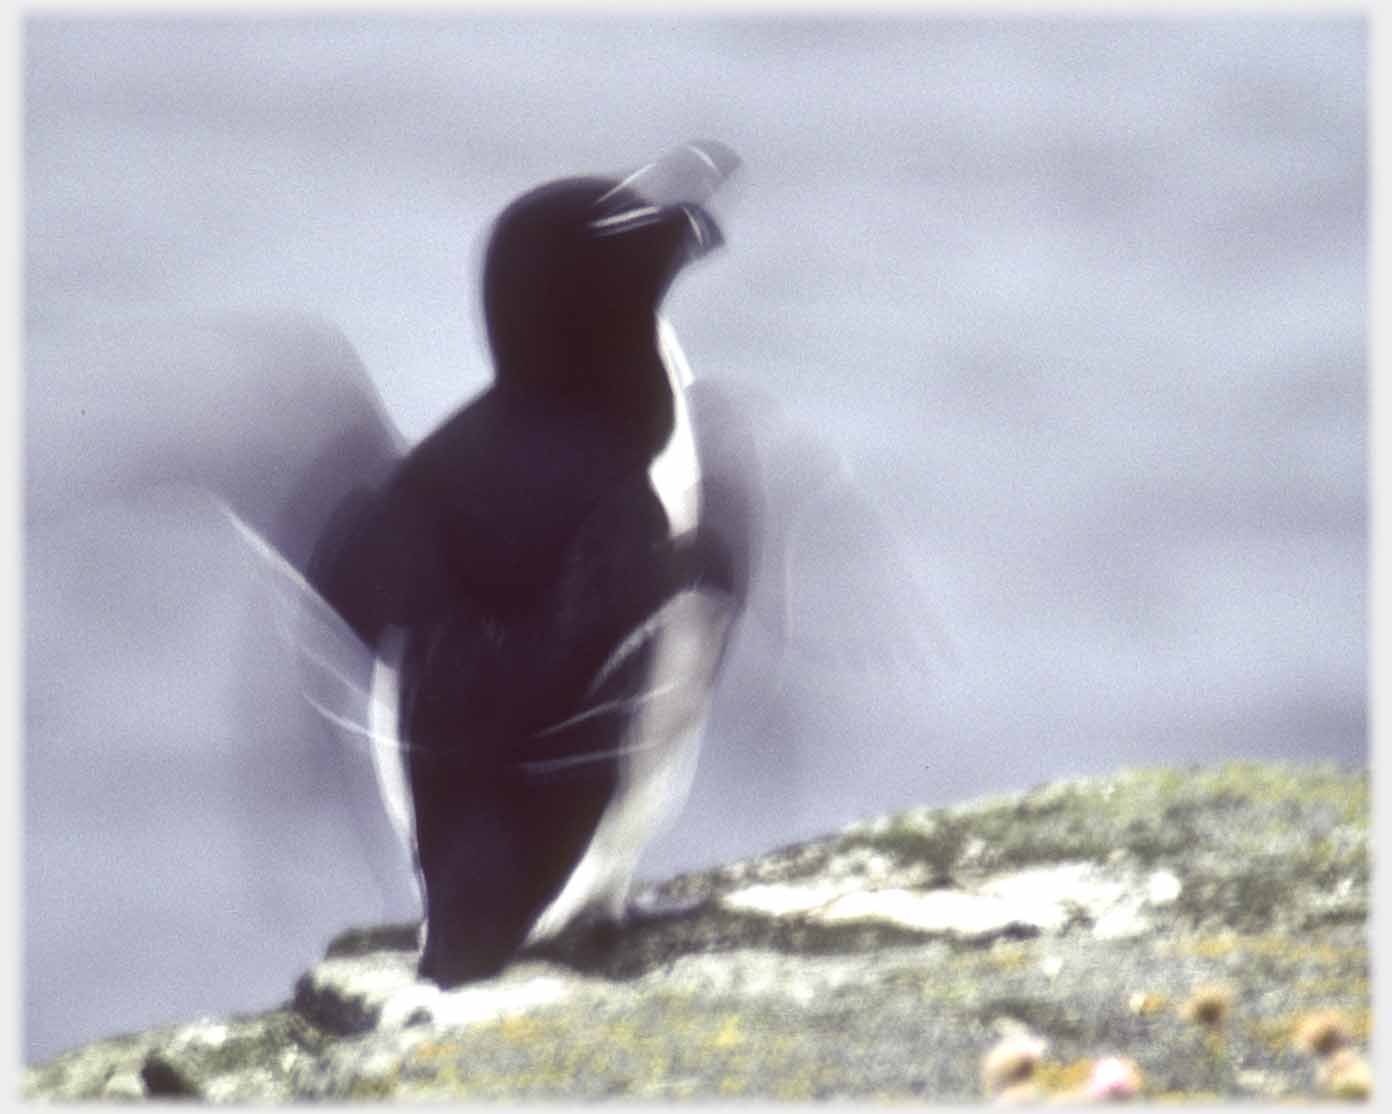 Black bird with blurrred fast moving wings and head.